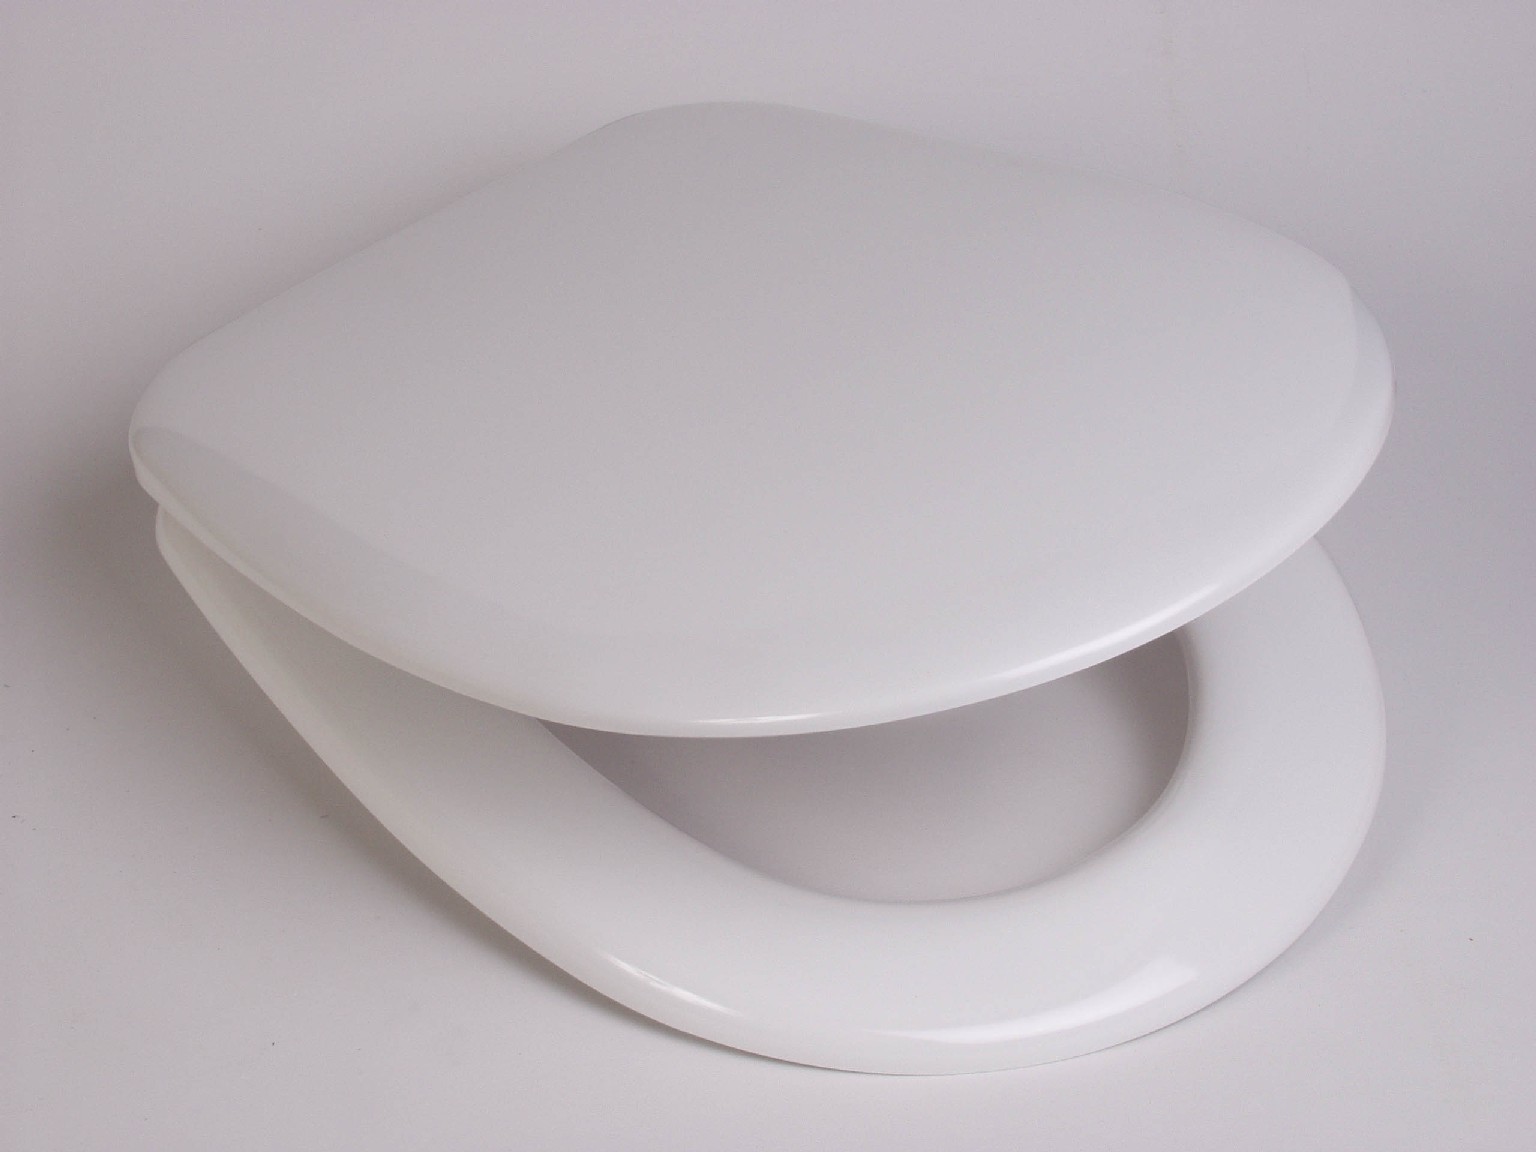 Toilet Seat and Cover